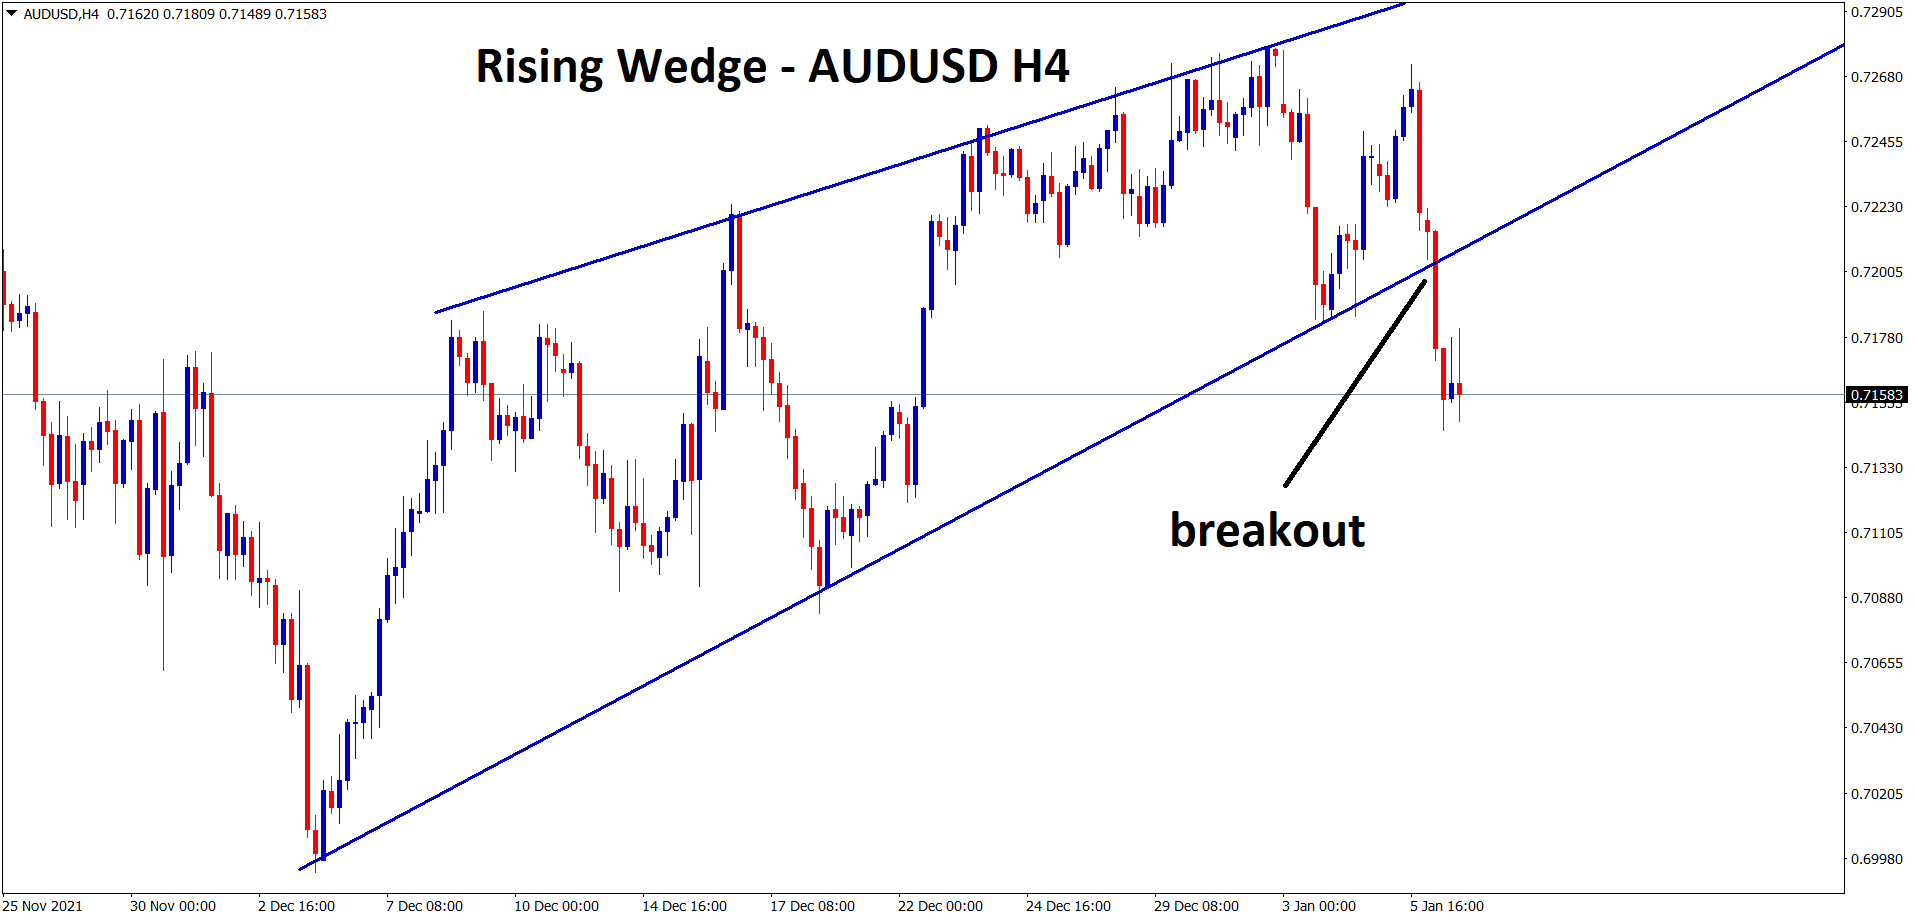 Rising wedge breakout at the low level on AUDUSD